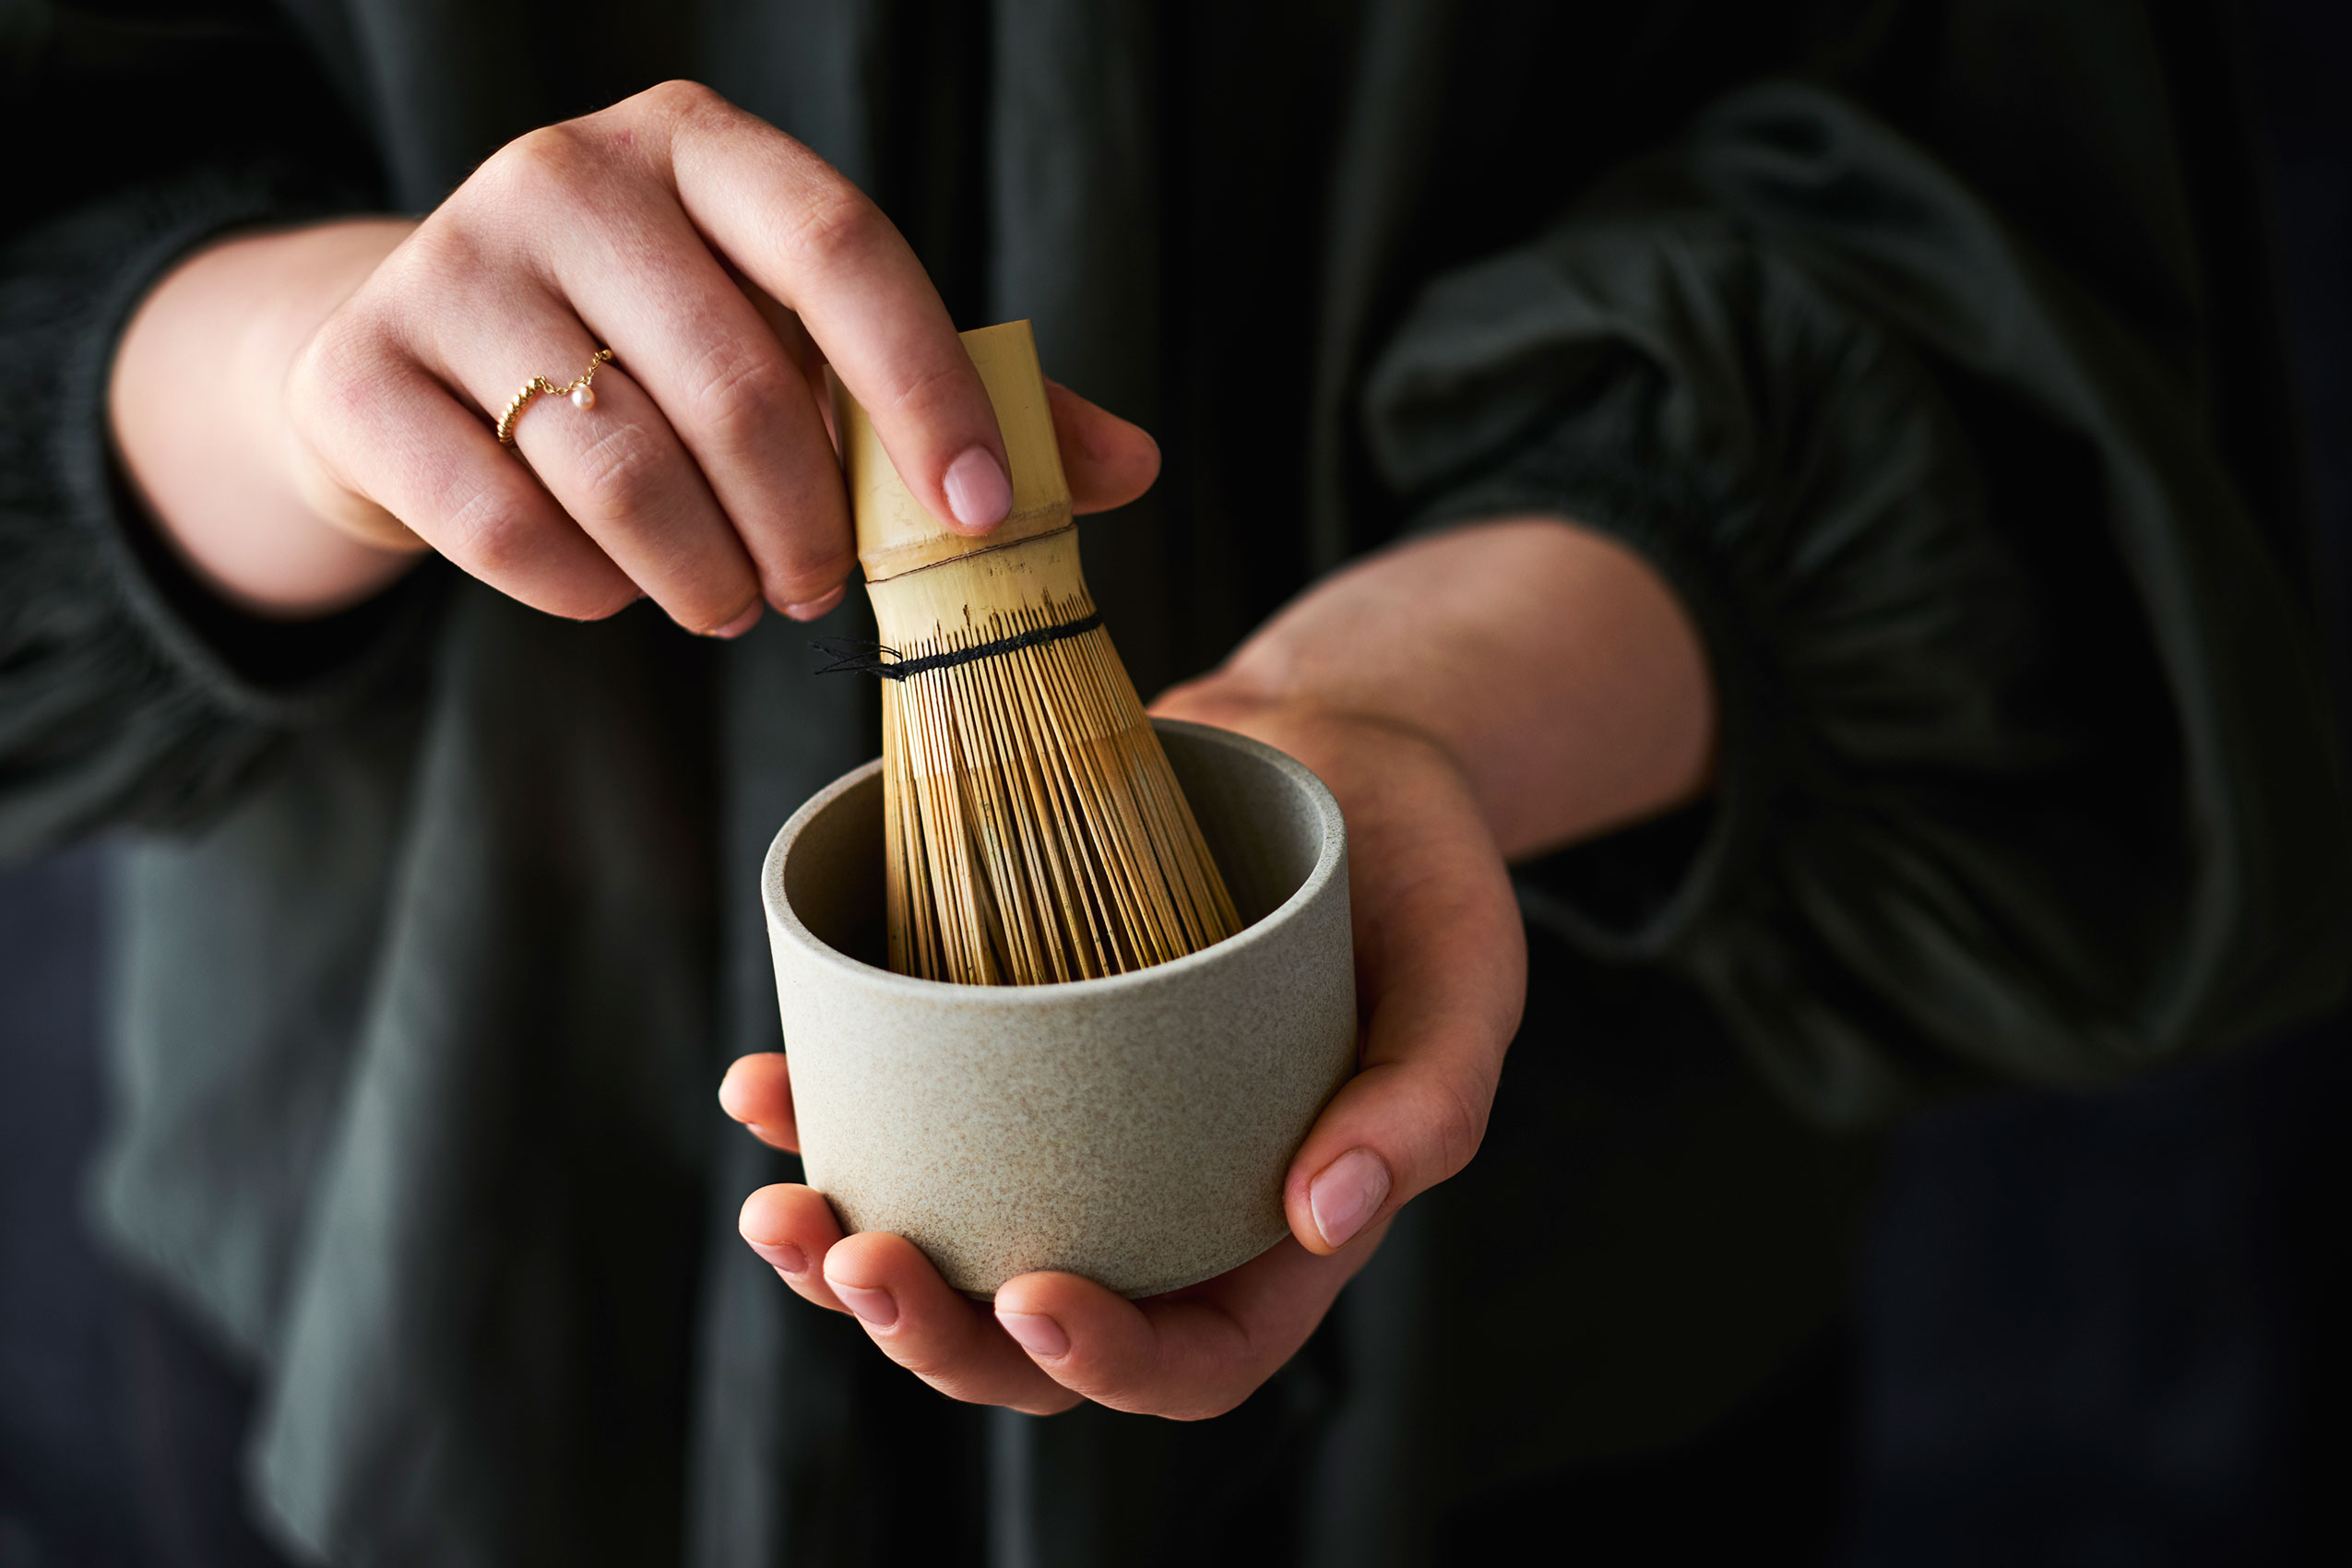 Bamboo Matcha Whisk & Rounded Ceramic Yunomi • Advertising & Editorial Food Photography